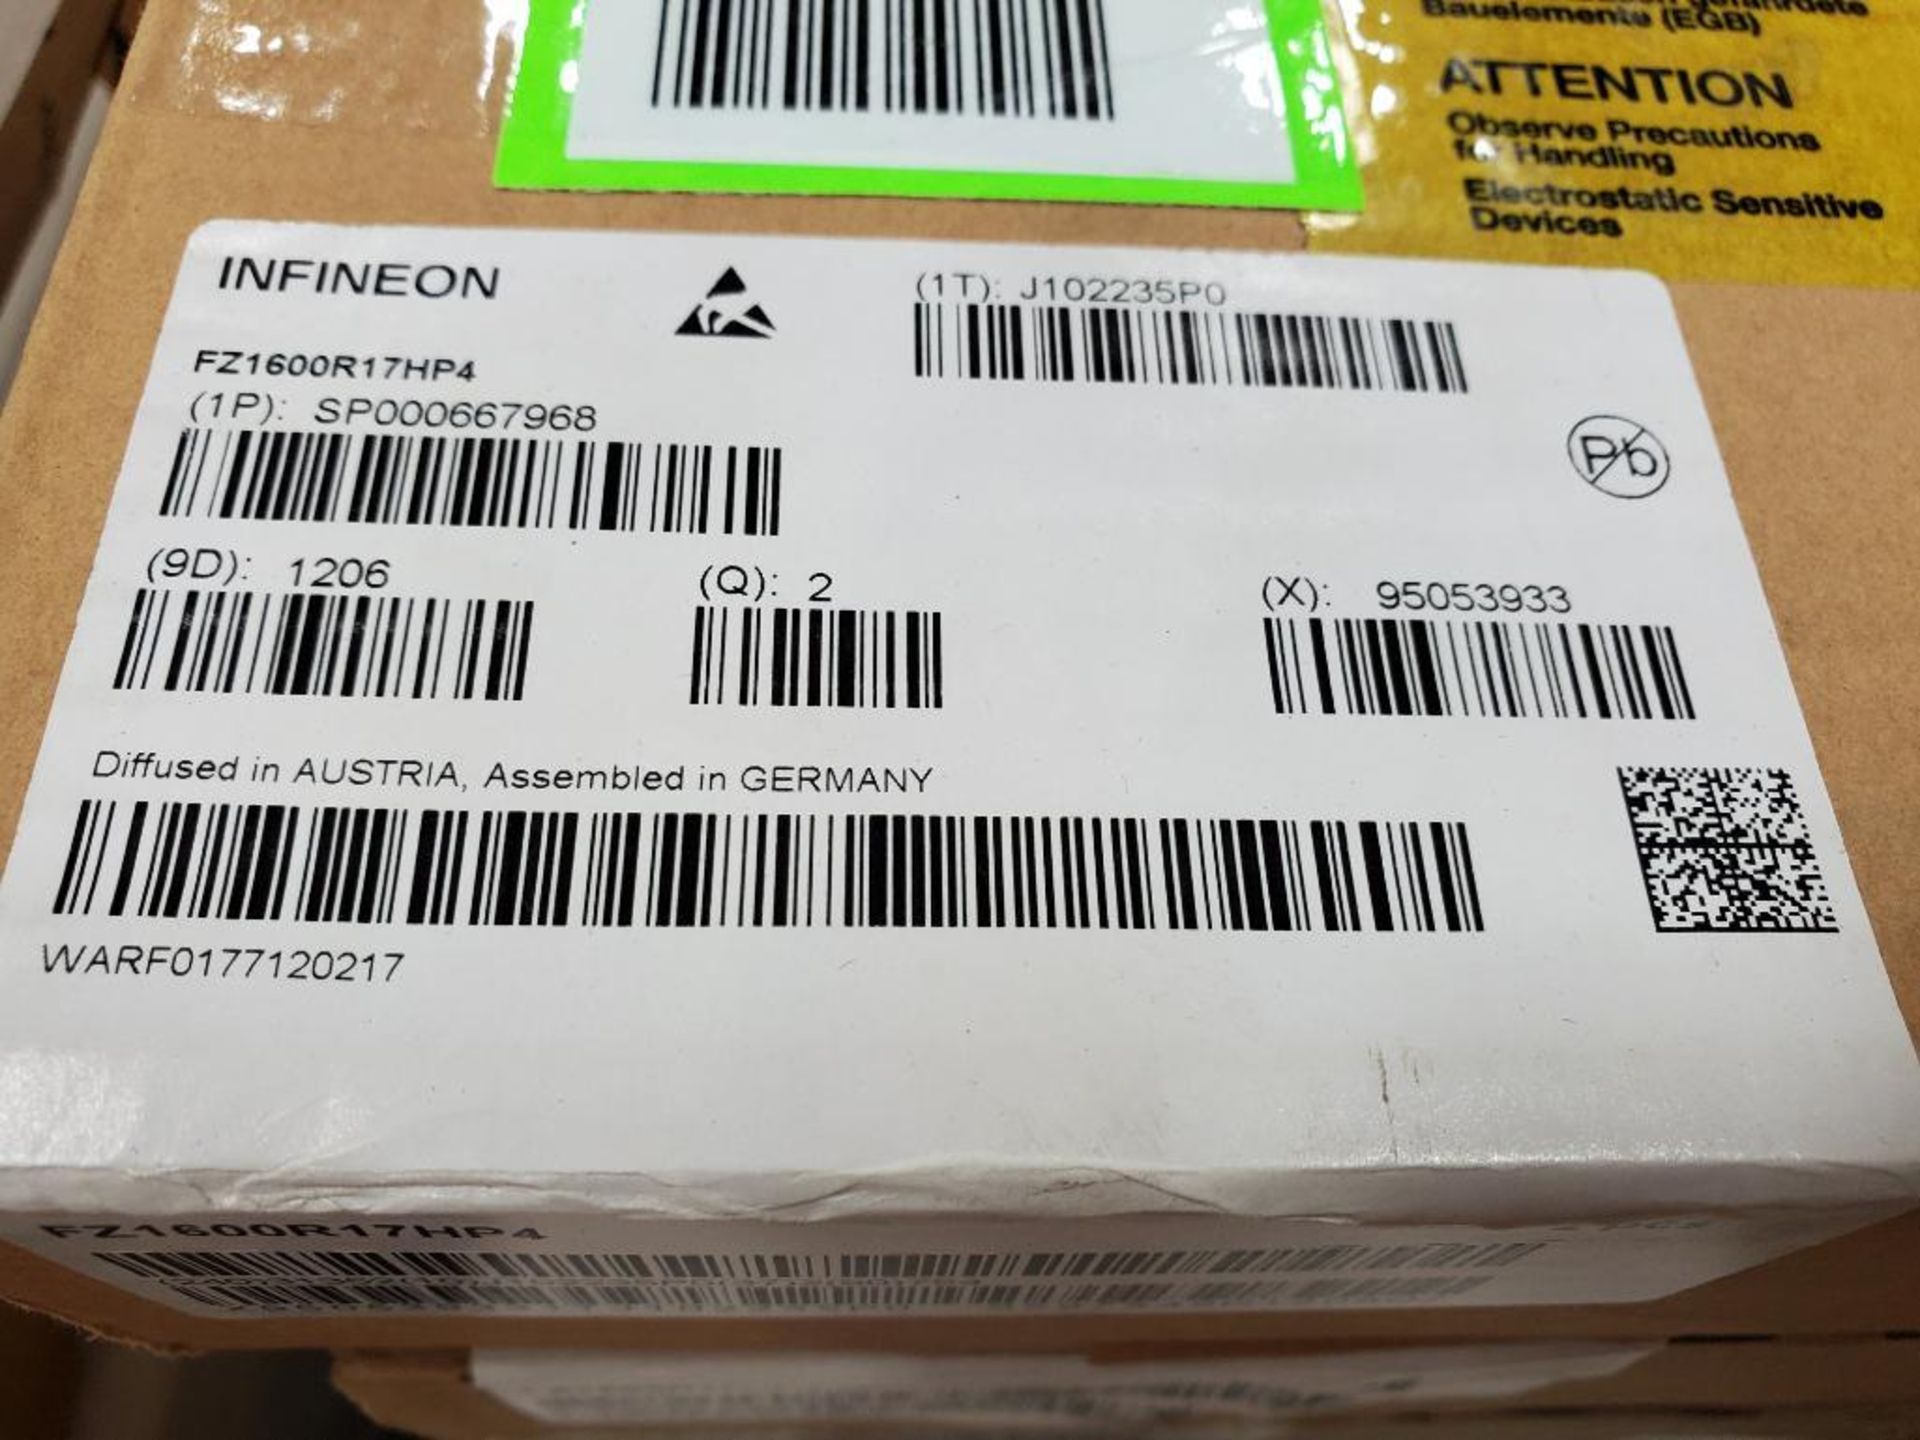 Qty 6 - Infineon semiconductor units. Part number FZ1600R17HP4. Boxed 2 per box bulk. New in box. - Image 3 of 3